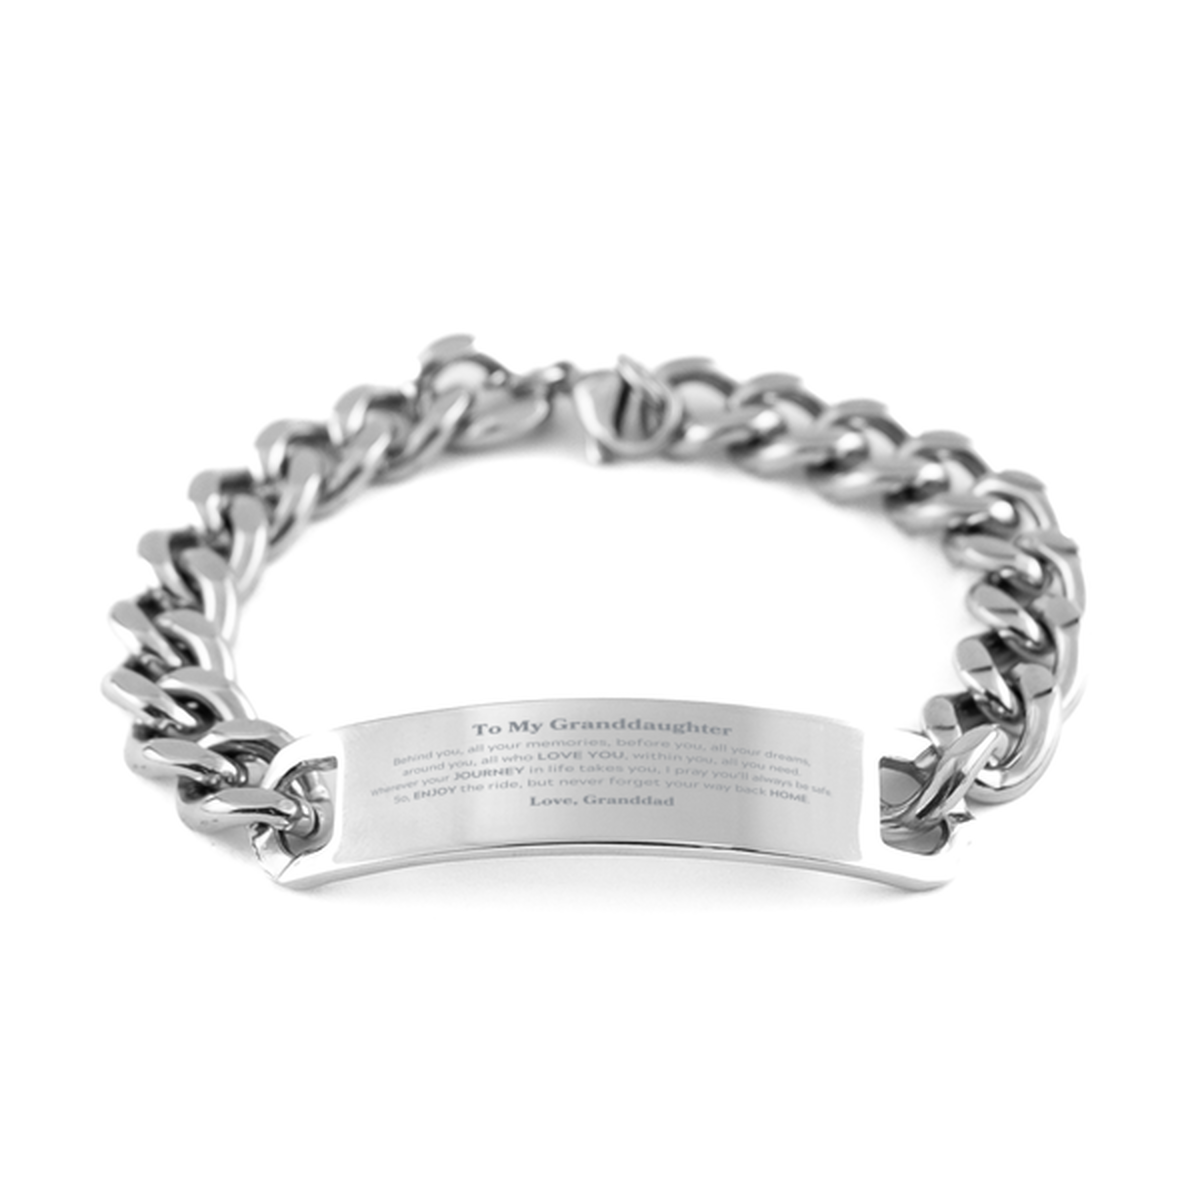 To My Granddaughter Graduation Gifts from Granddad, Granddaughter Cuban Chain Stainless Steel Bracelet Christmas Birthday Gifts for Granddaughter Behind you, all your memories, before you, all your dreams. Love, Granddad